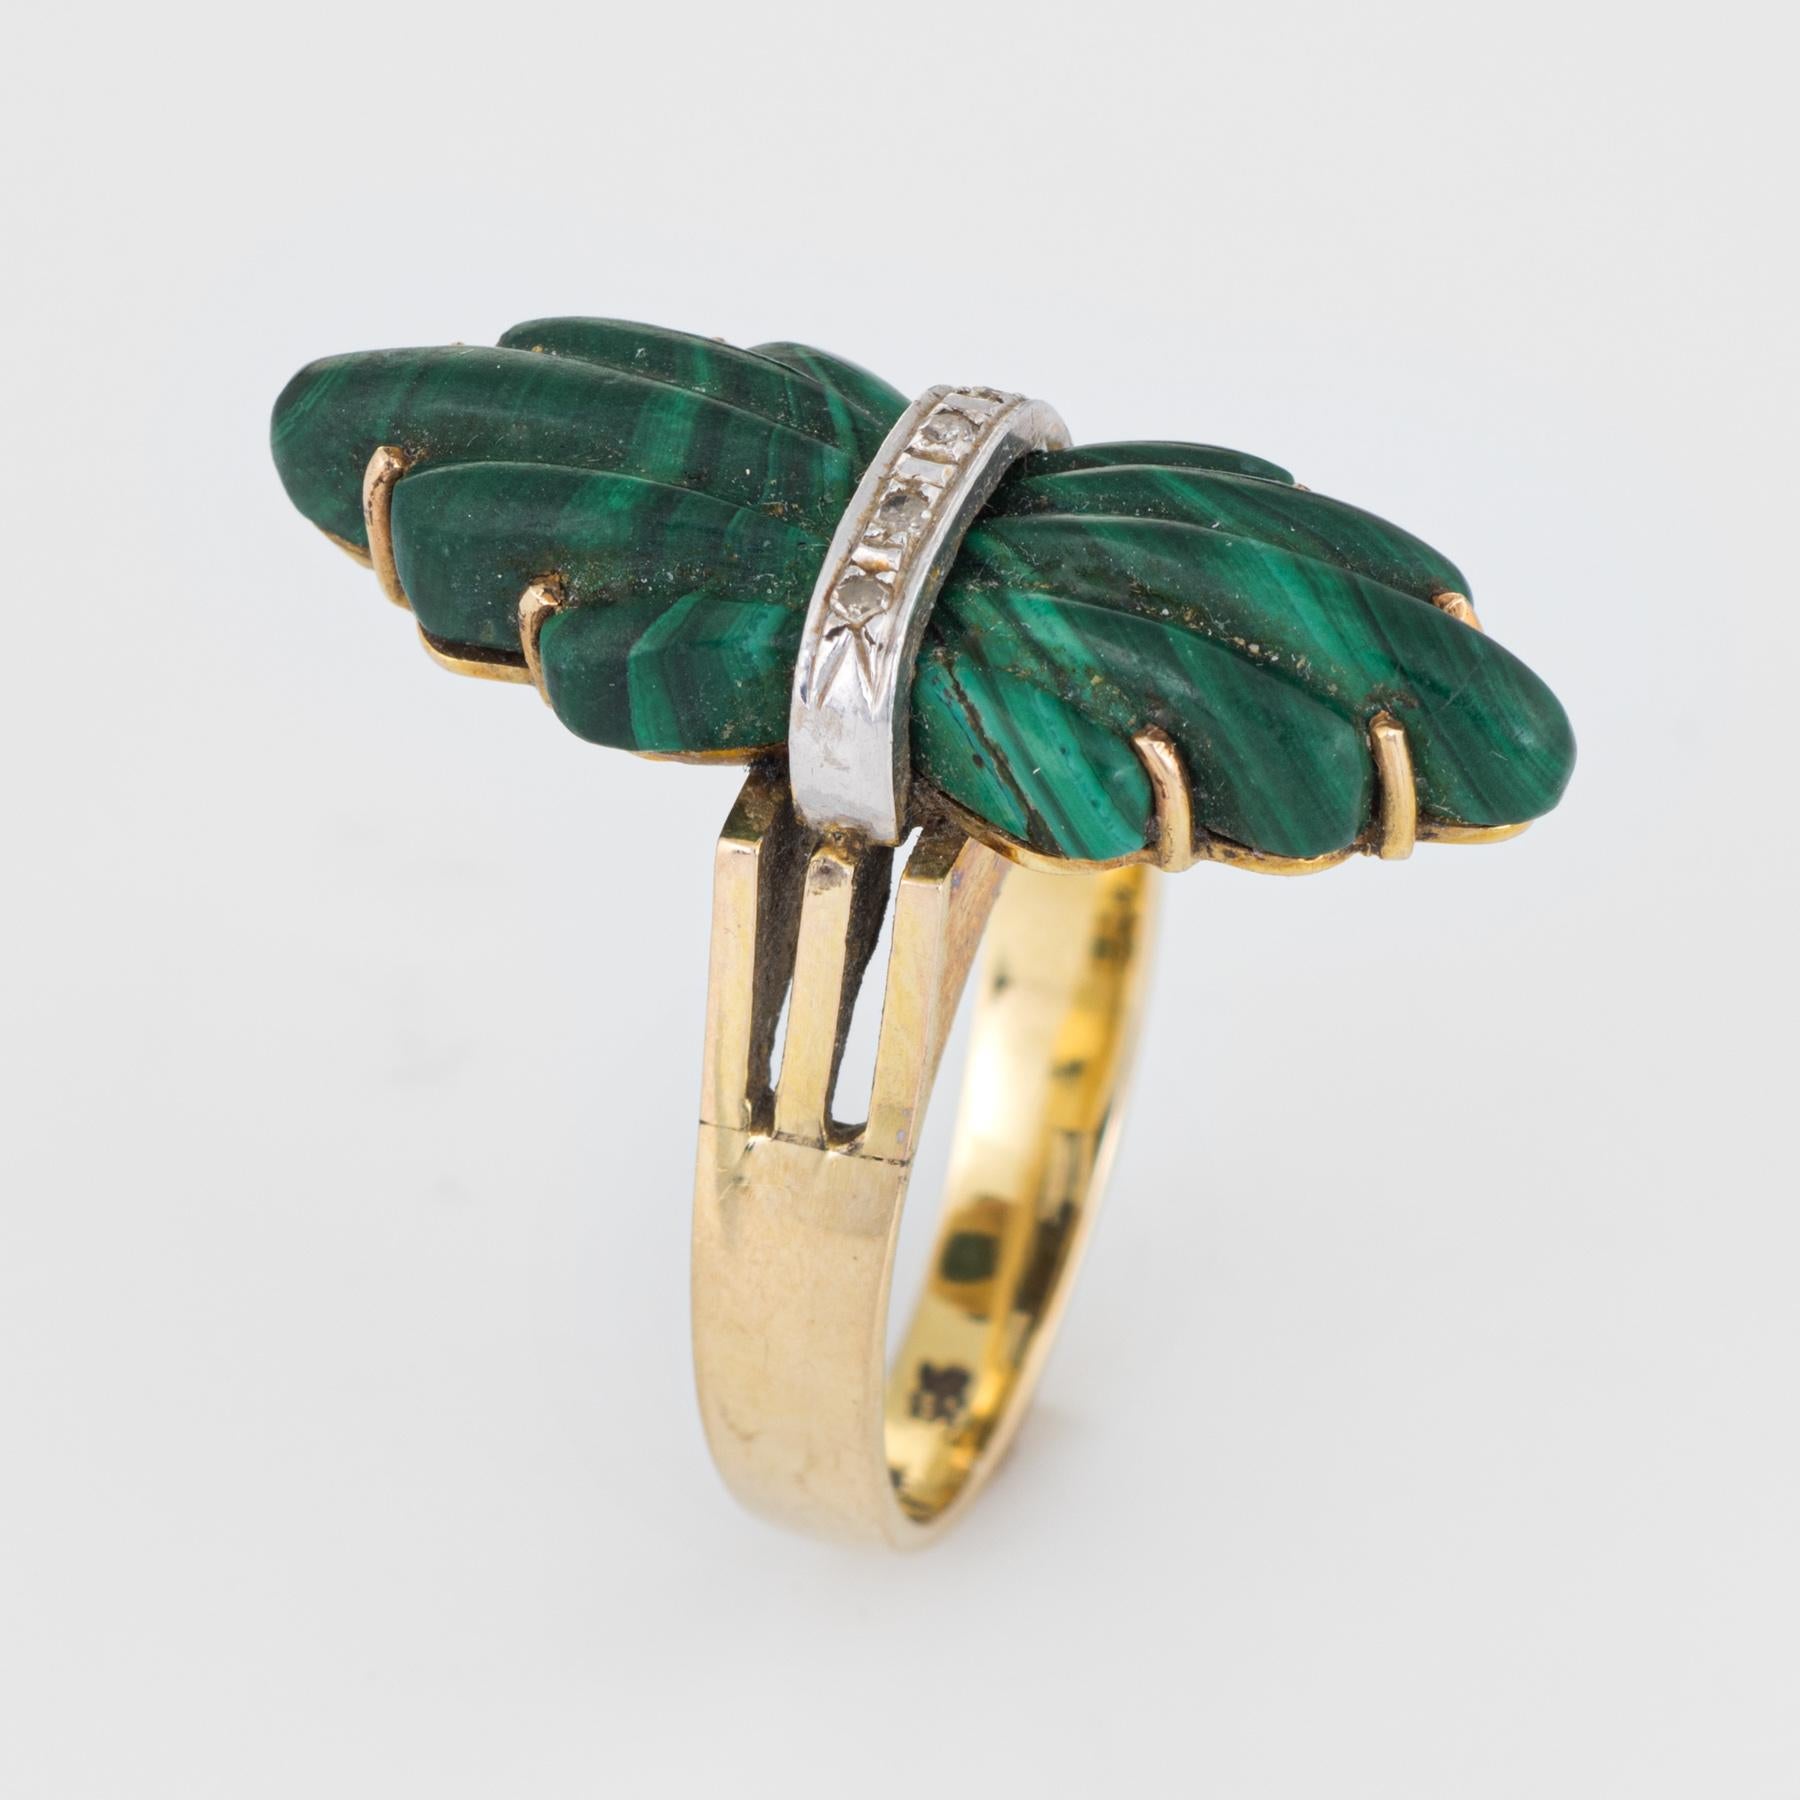 Finely detailed vintage fluted malachite & diamond cocktail ring (circa 1970s), crafted in 14 karat yellow gold. 

Fluted malachite measures 28mm x 10.5mm, accented with an estimated 0.03 carats of single cut diamonds (estimated at H-I color and SI1